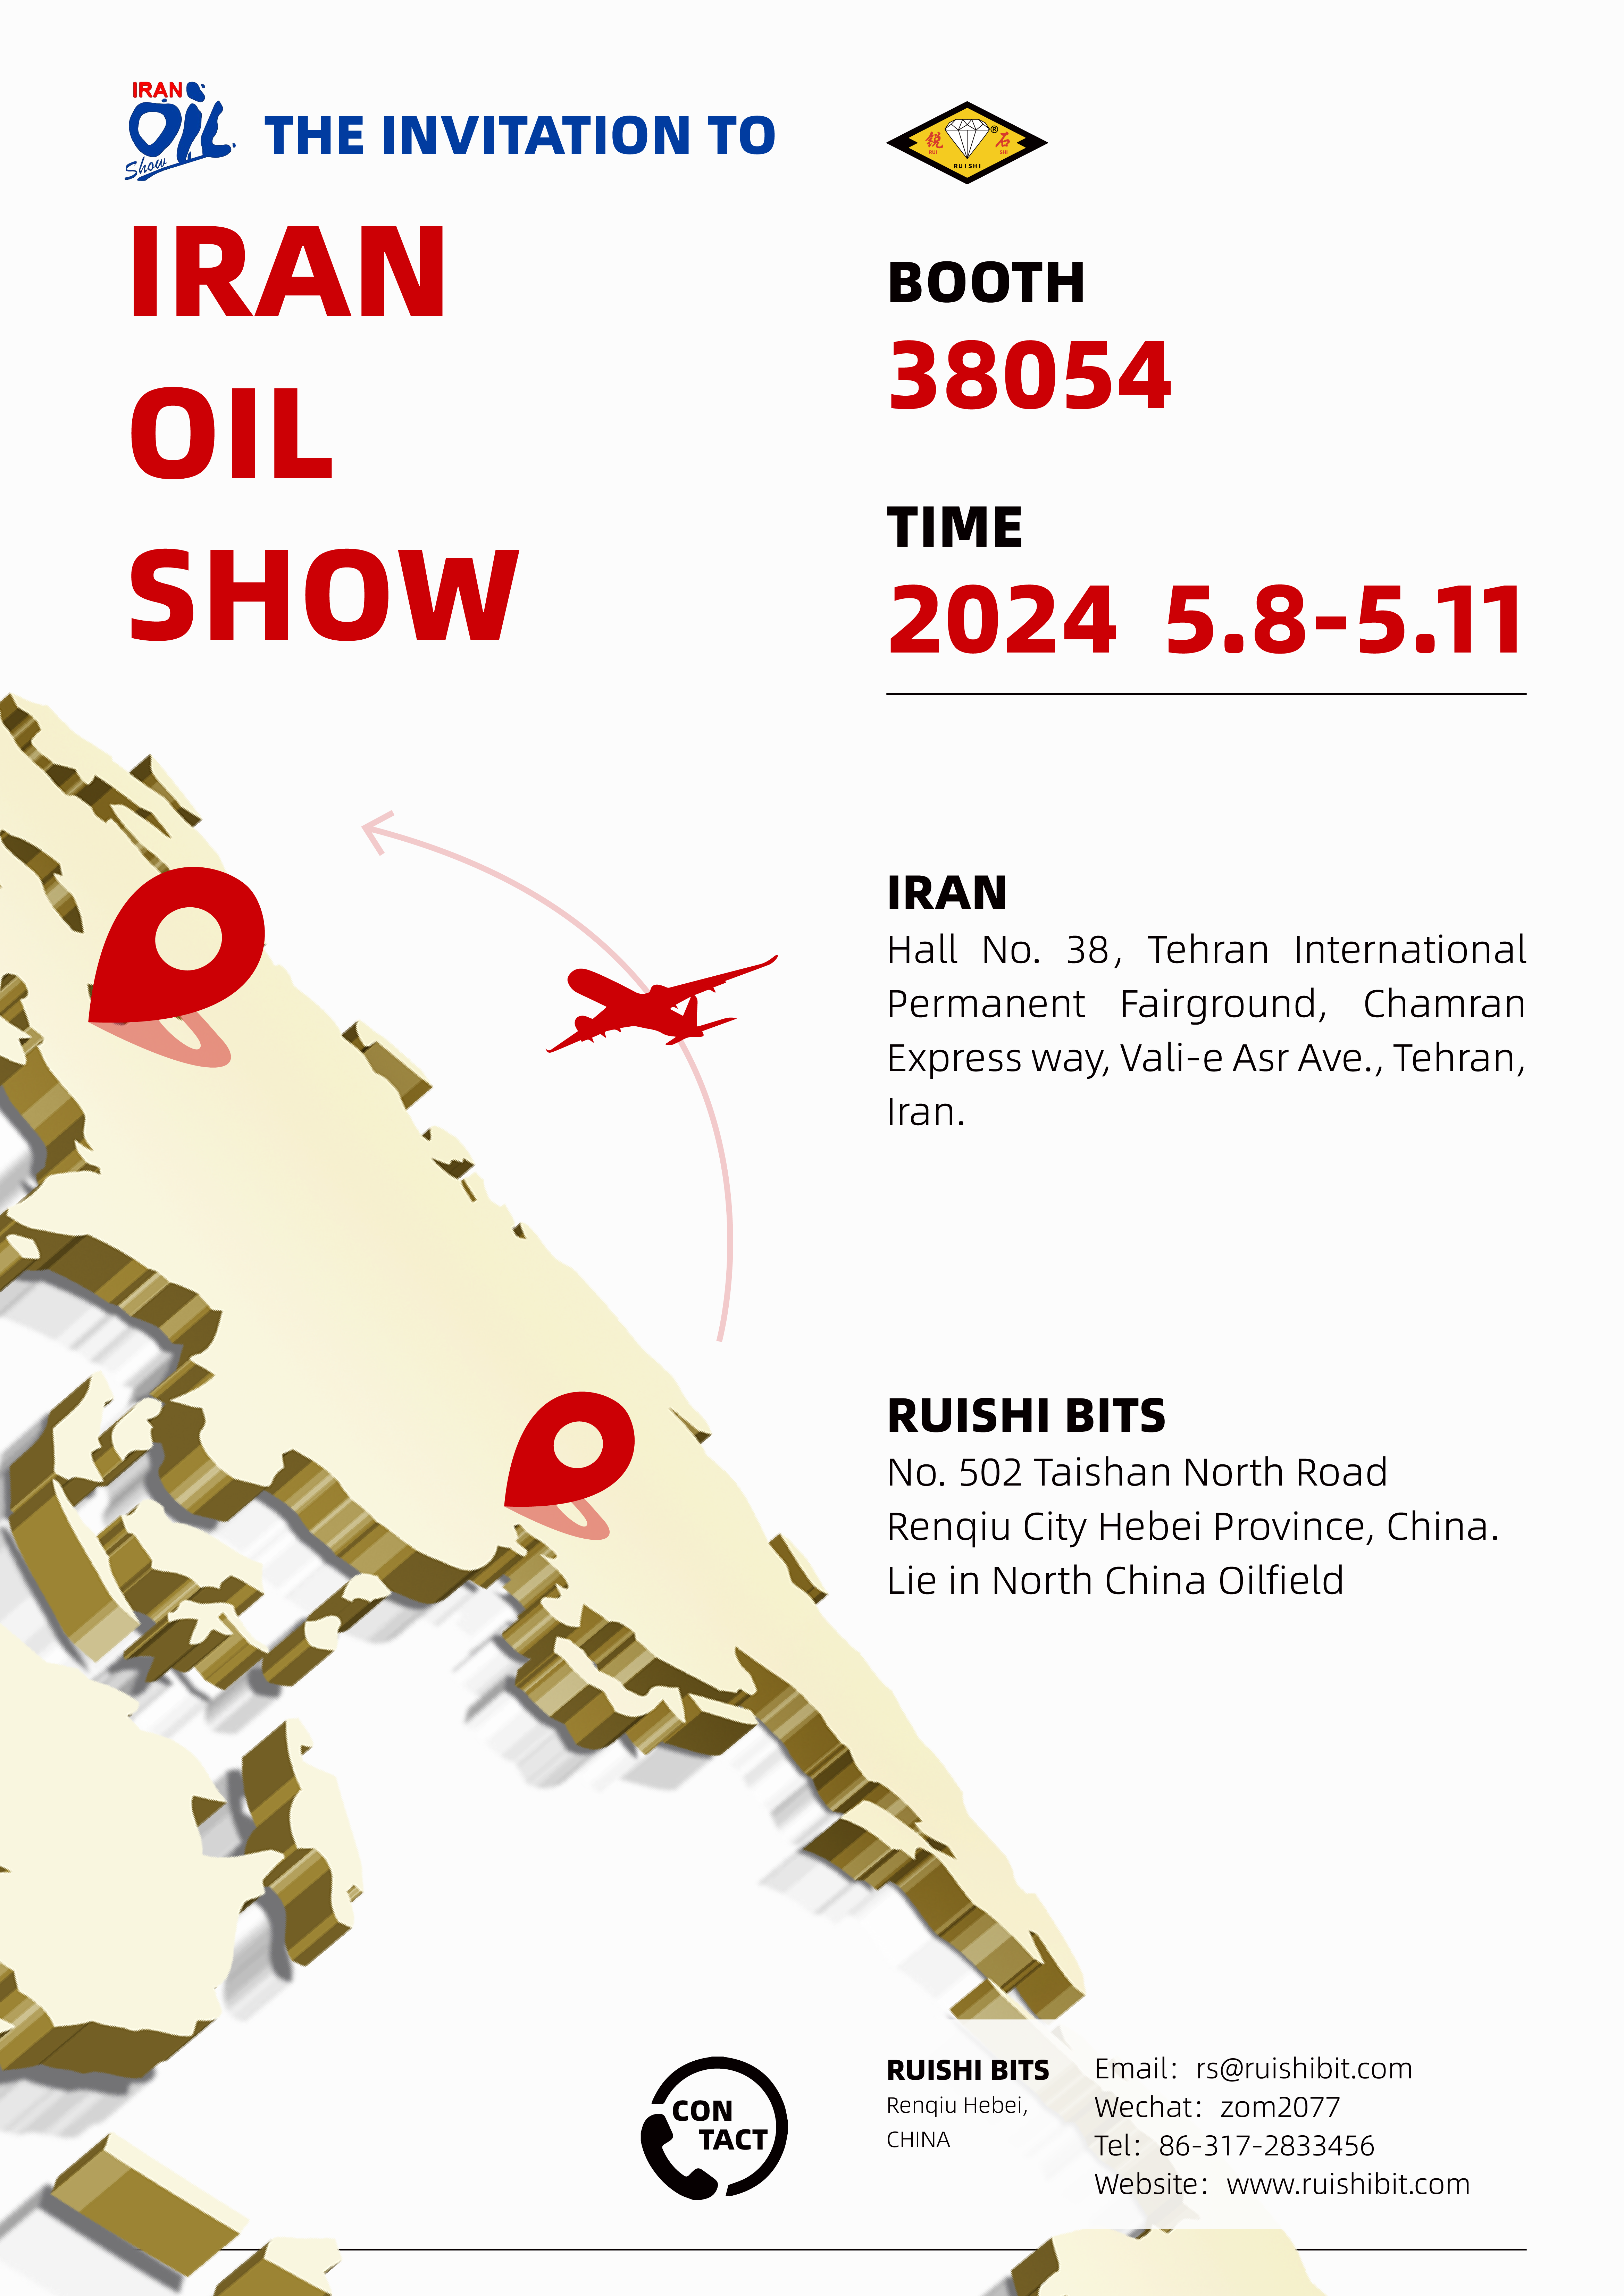 The 2024 Iran Oil Show is about to begin on May 5th 2024! Welcome to our  booth 38054.